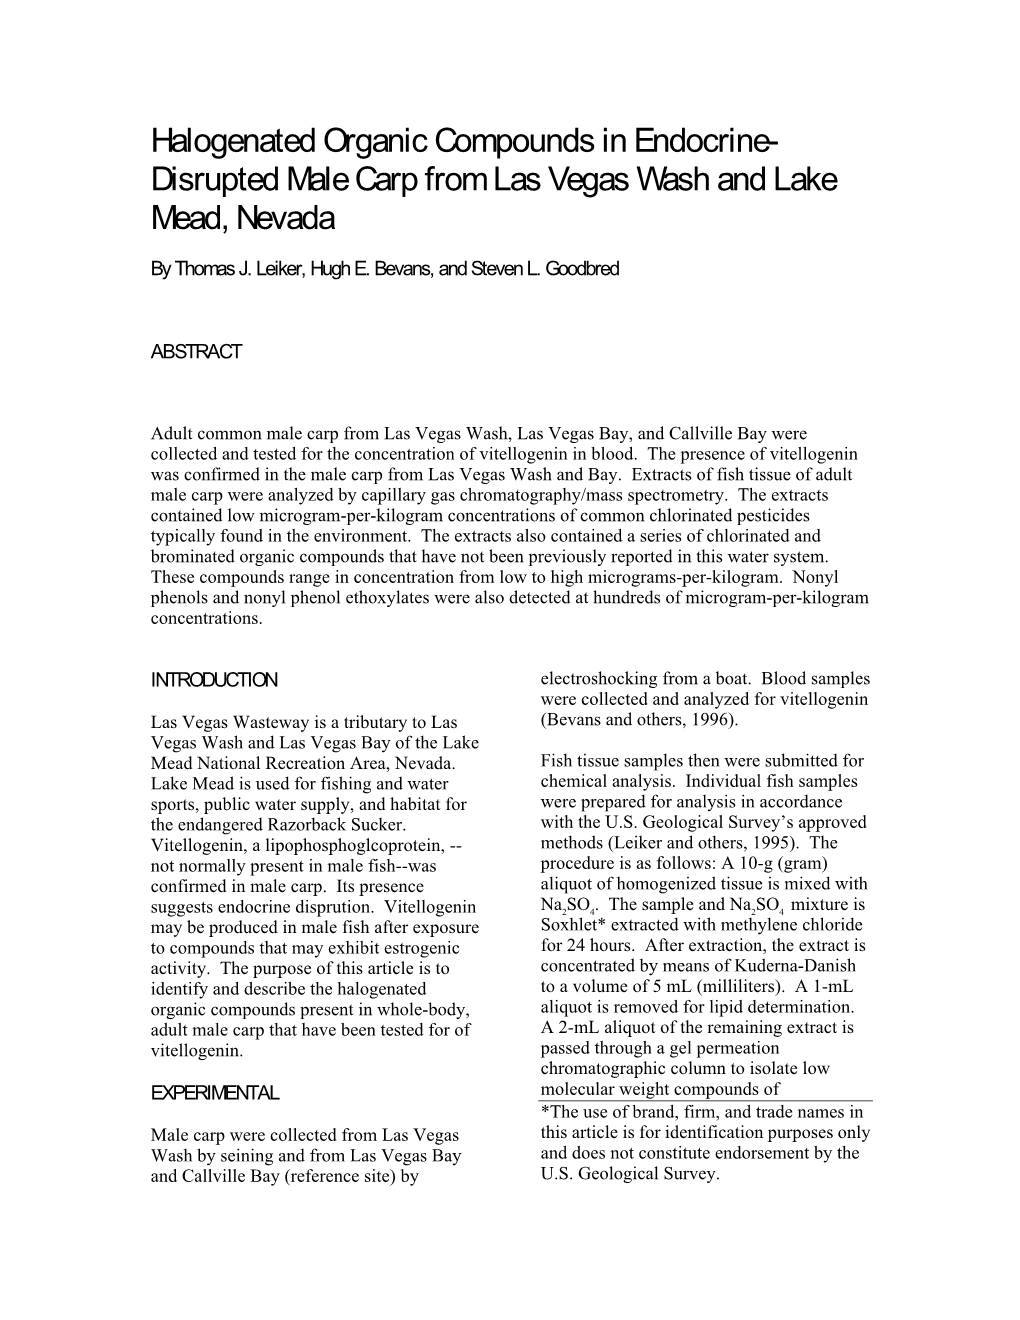 Halogenated Organic Compounds in Endocrine- Disrupted Male Carp from Las Vegas Wash and Lake Mead, Nevada